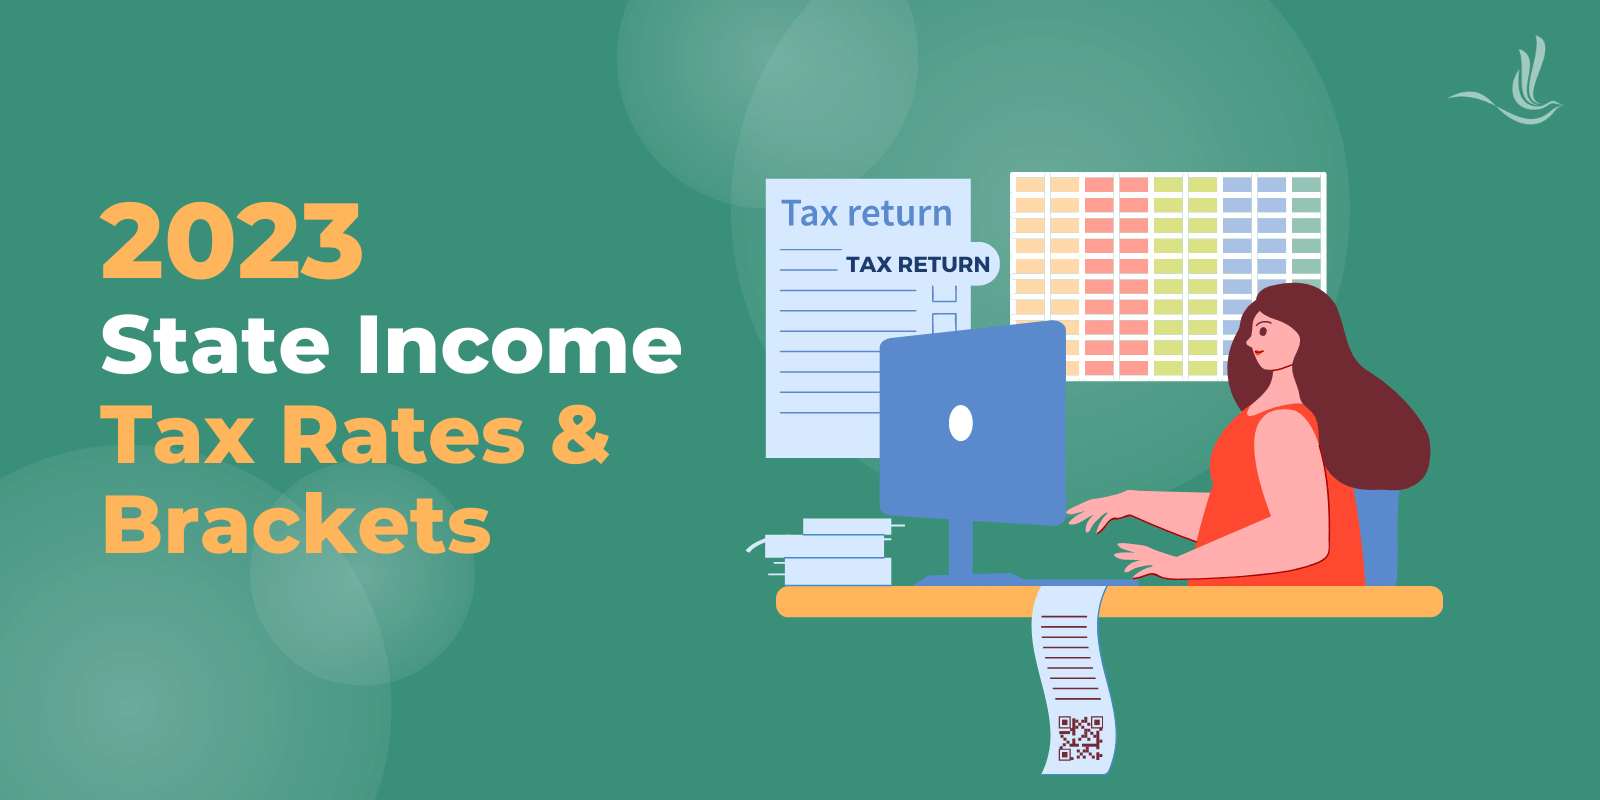 2023 state income tax rates and brackets